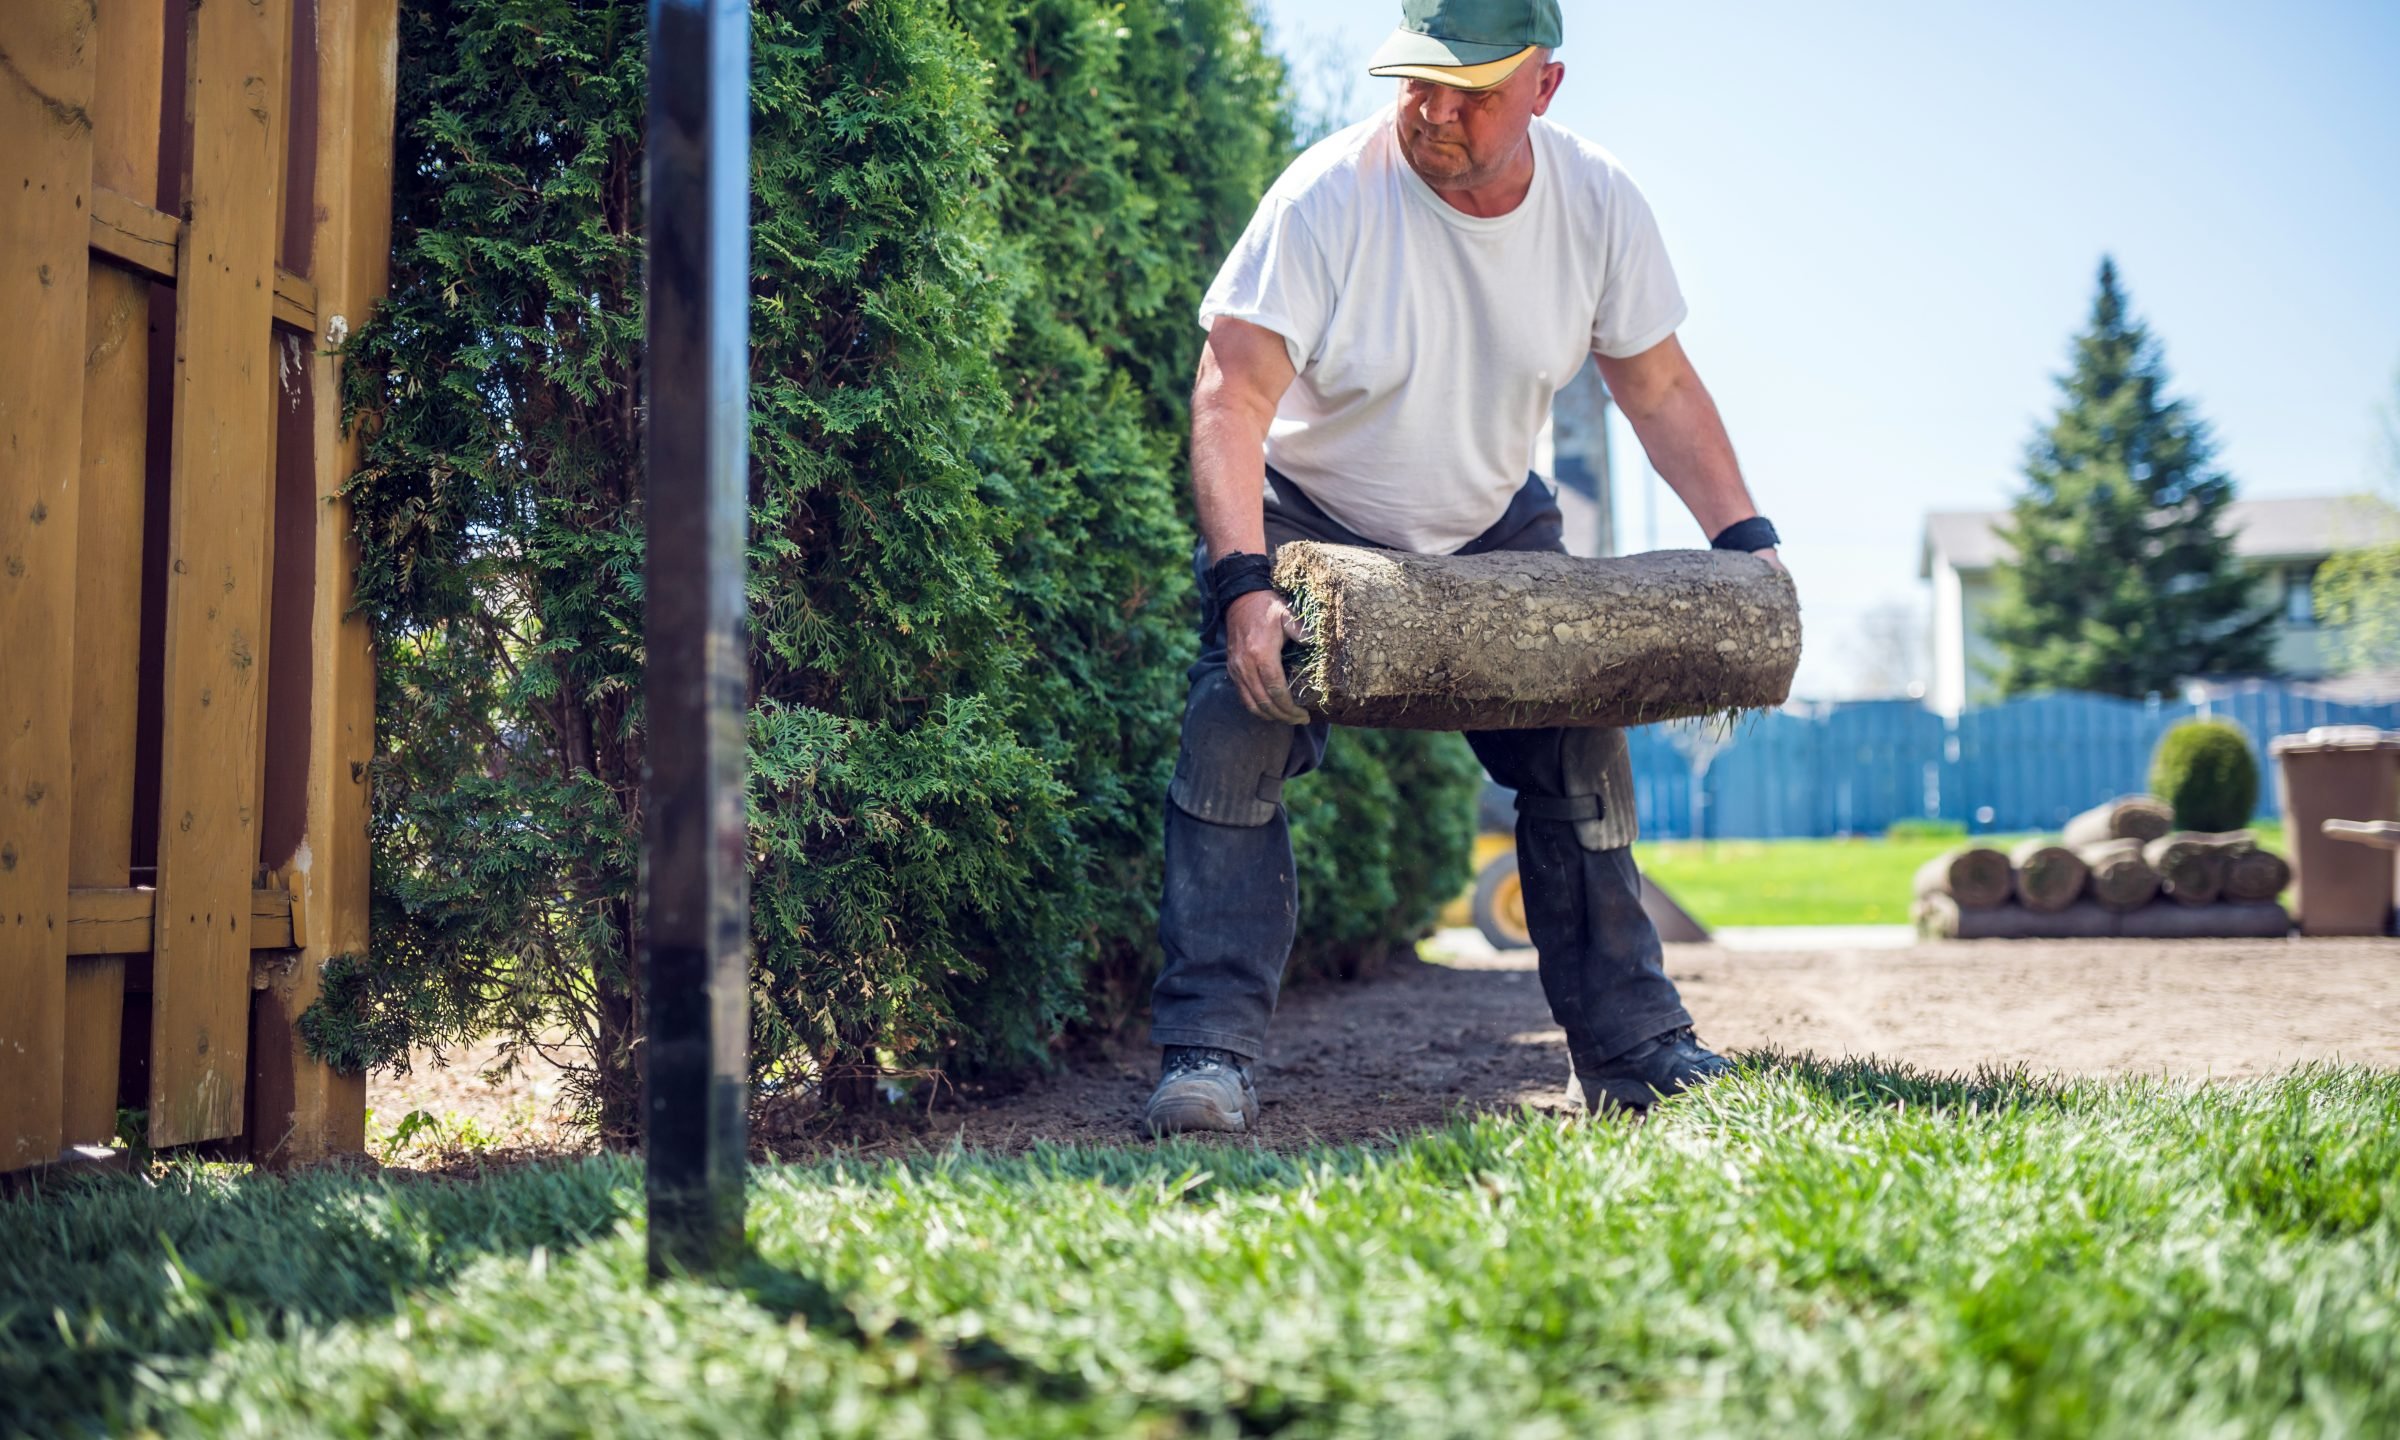 A Landscaping Or Lawn Care Business, How Much Do Professional Landscapers Make